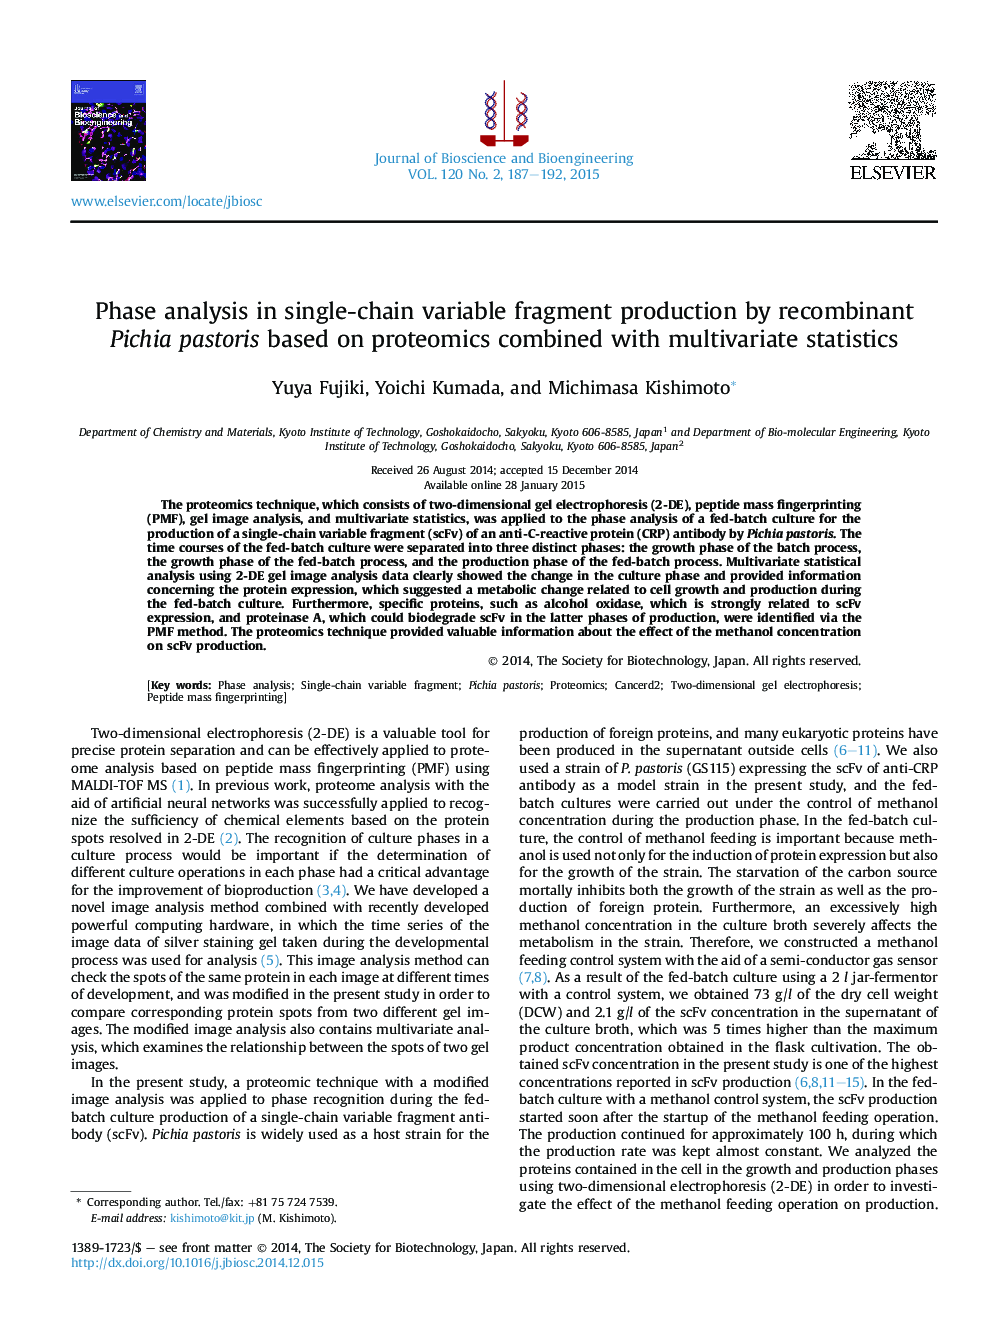 Phase analysis in single-chain variable fragment production by recombinant Pichia pastoris based on proteomics combined with multivariate statistics